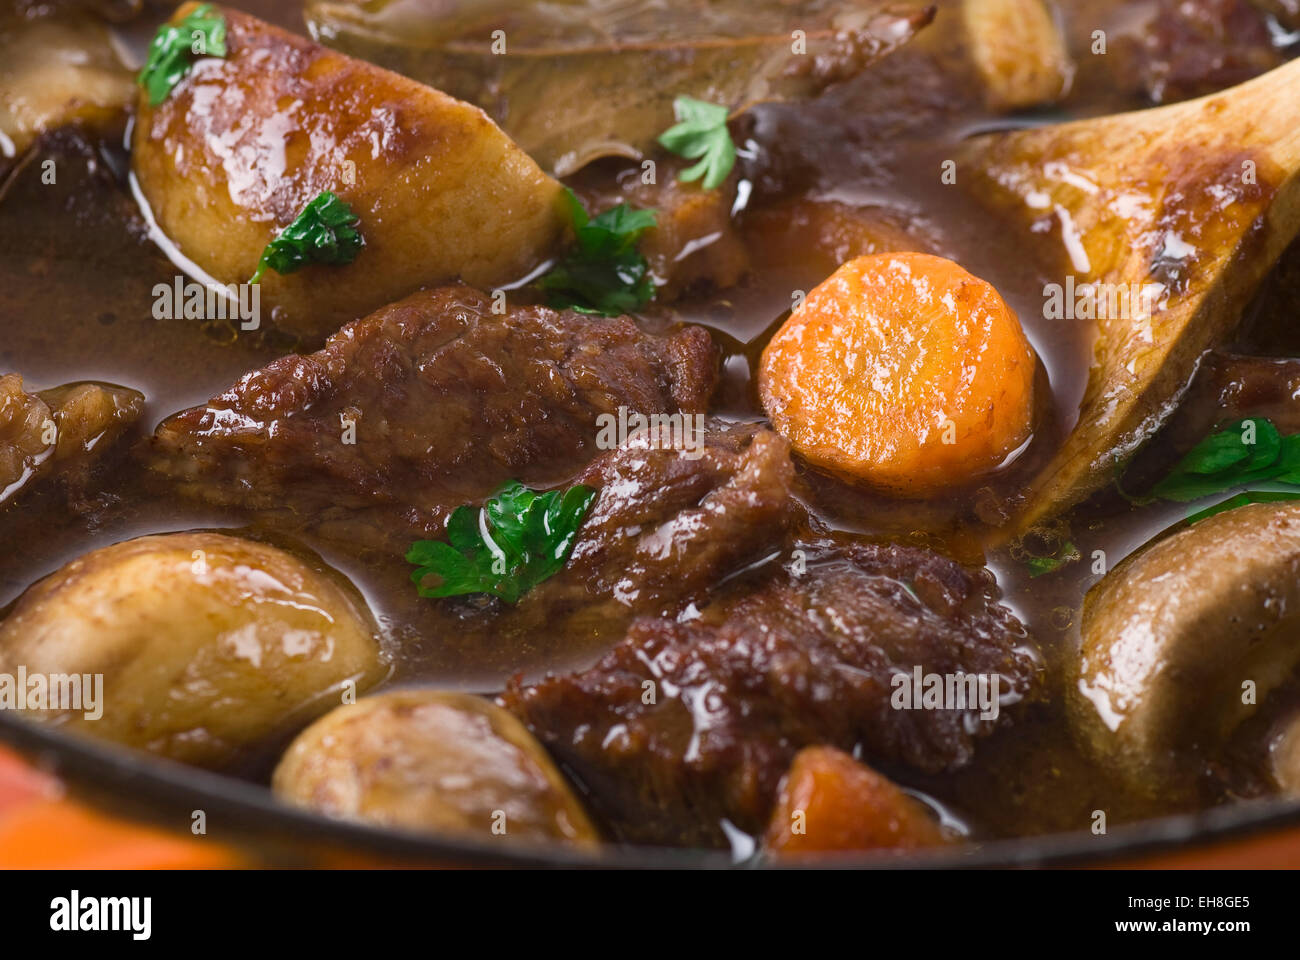 Meat and vegetable casserole in a pot. Stock Photo